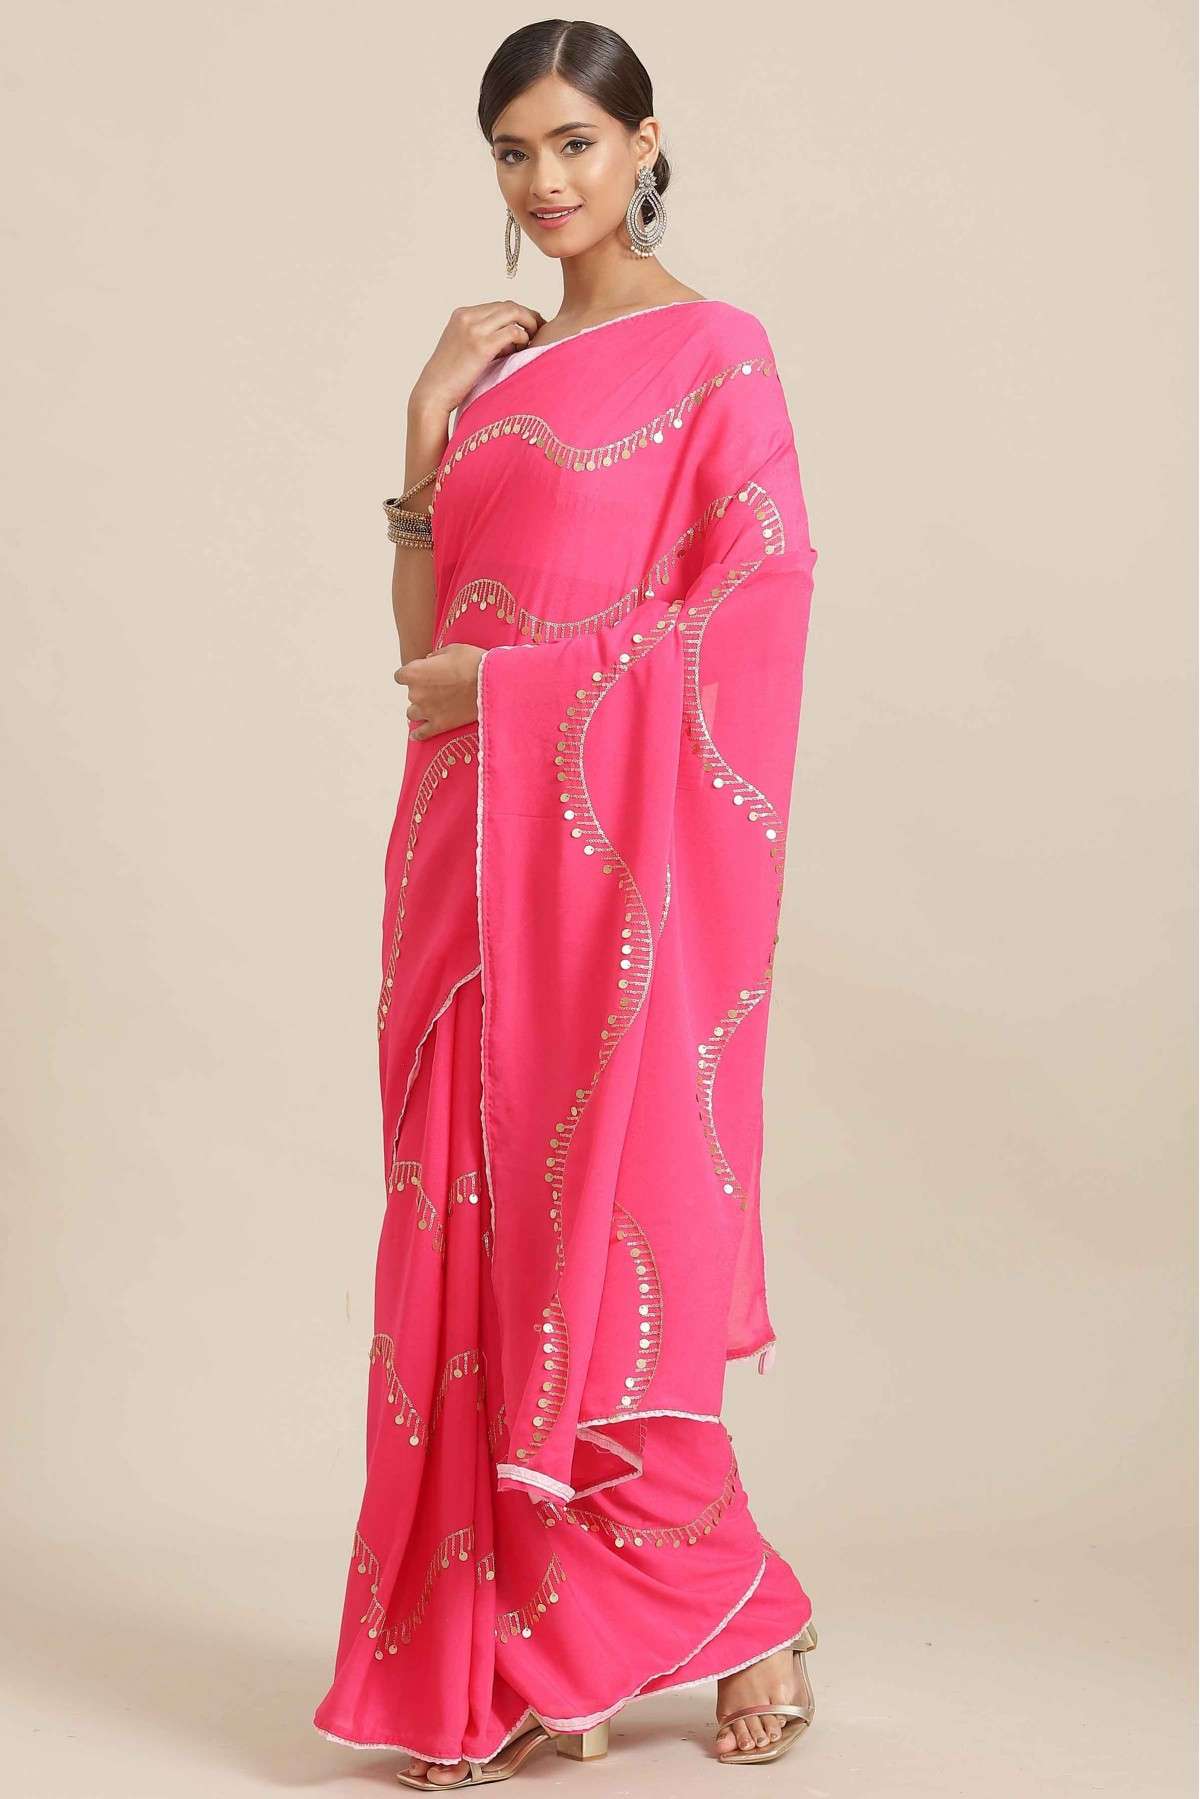 Georgette Embroidery Saree In Pink Colour - SR5415873